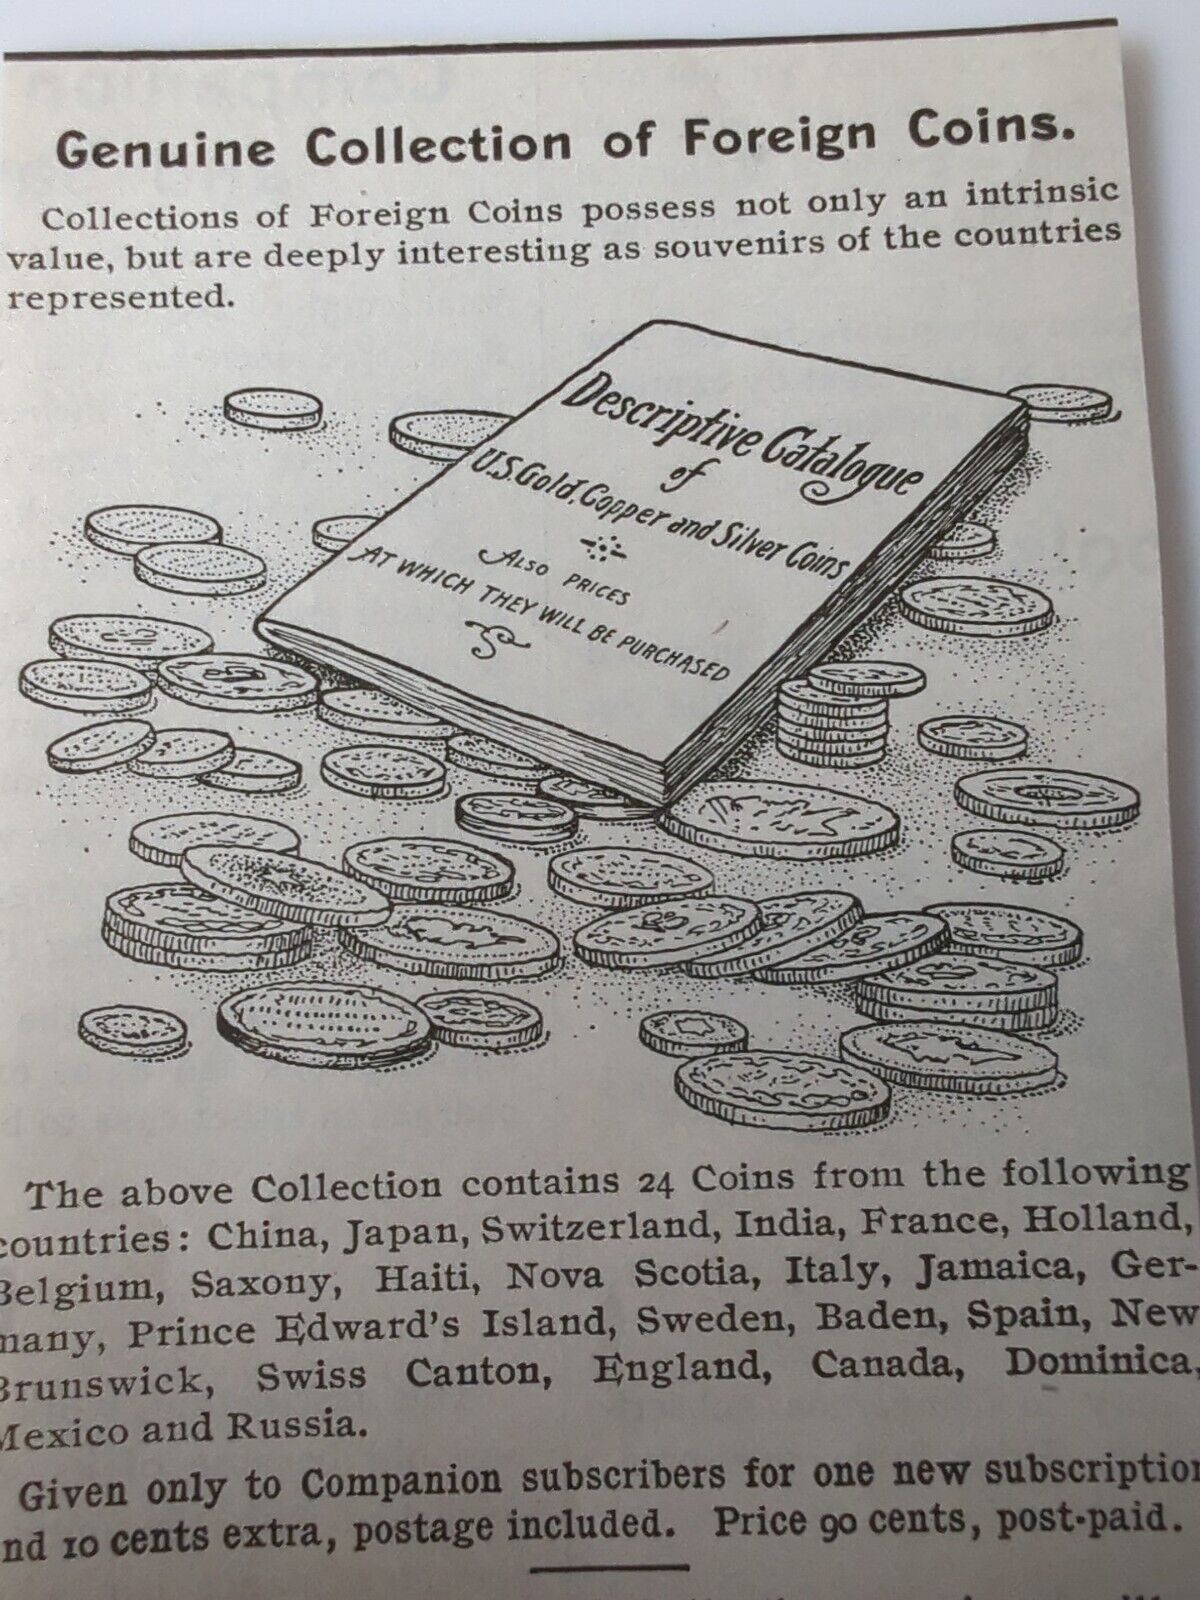 Genuine Collection Of Foreign Coins Advertisement